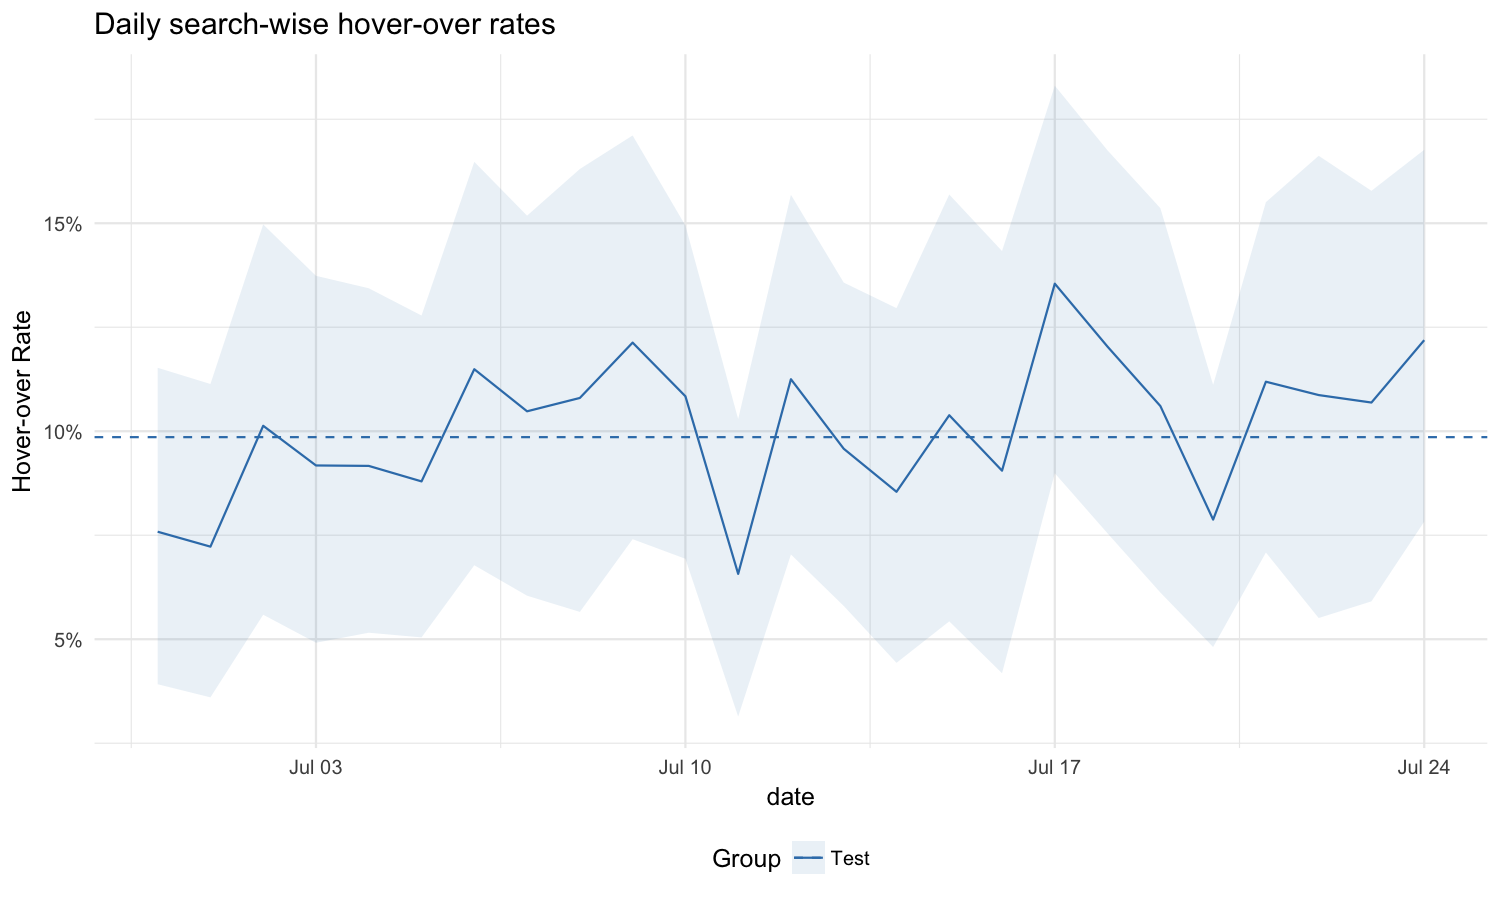 **Figure 4**: Daily search-wise hover-over rate of the test group. Dashed lines mark the overall hover-over rate.